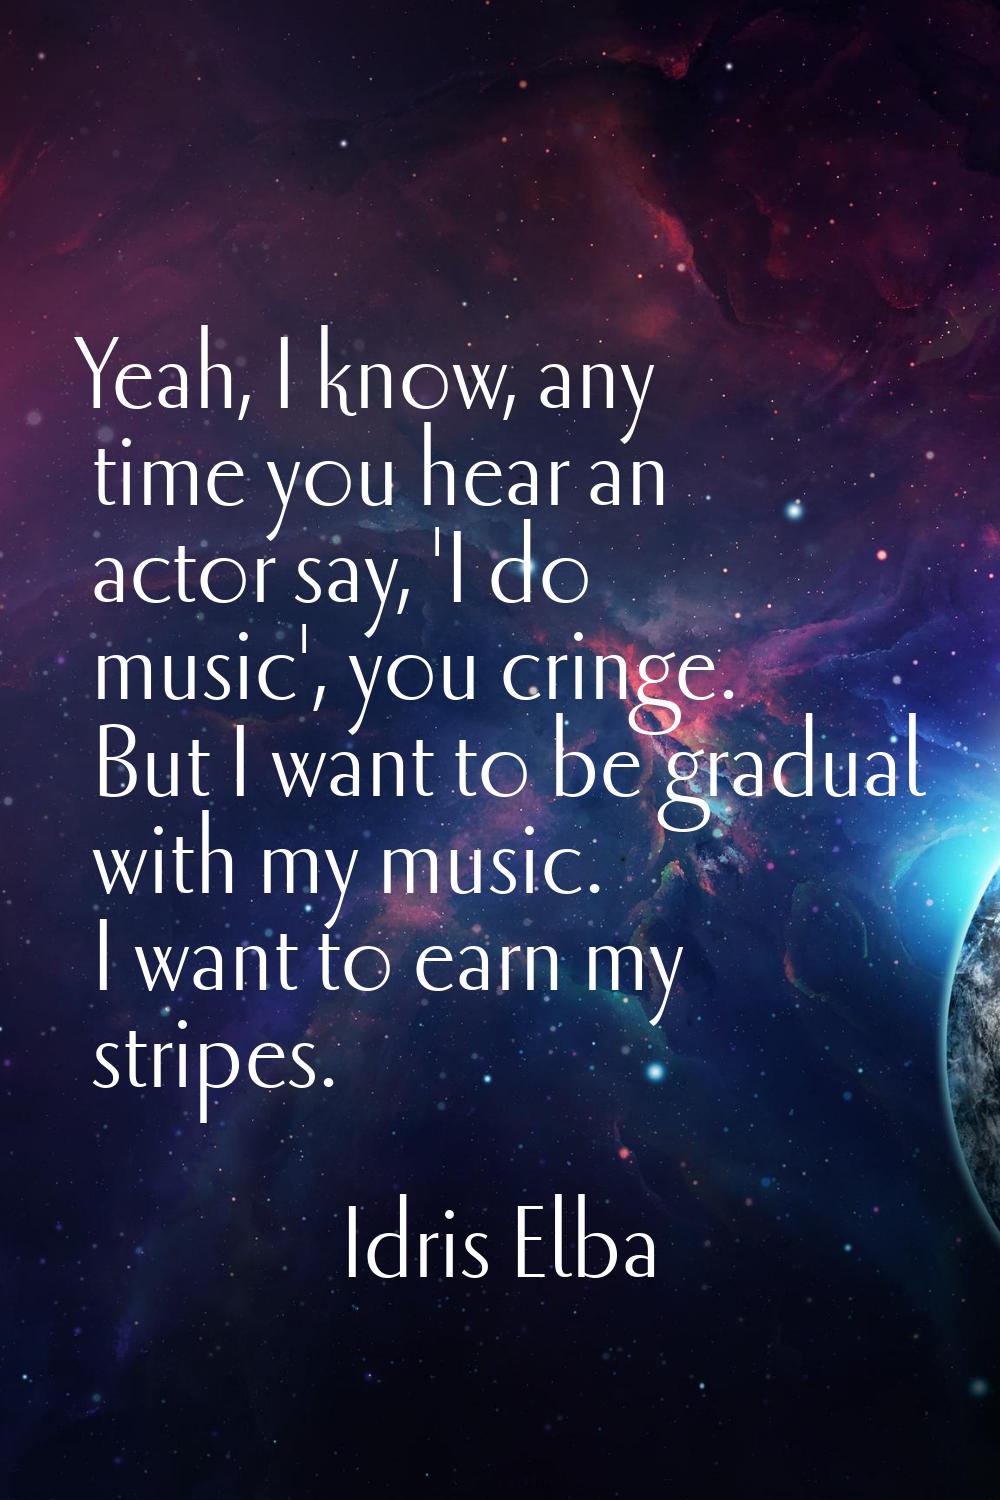 Yeah, I know, any time you hear an actor say, 'I do music', you cringe. But I want to be gradual wi